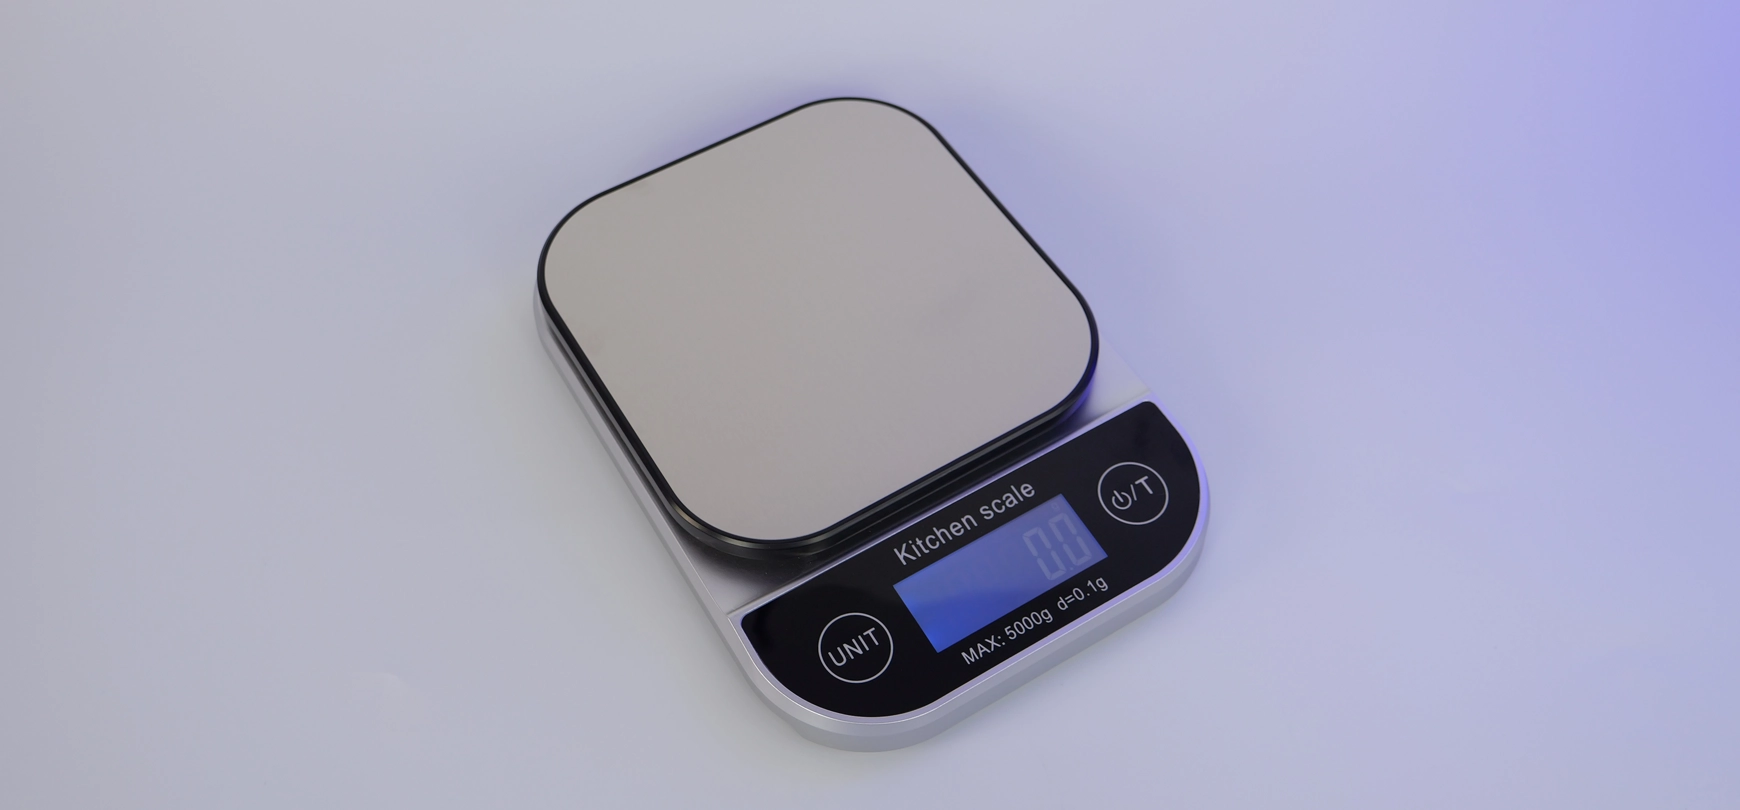 Small kitchen scale with taring function up to 5 kg